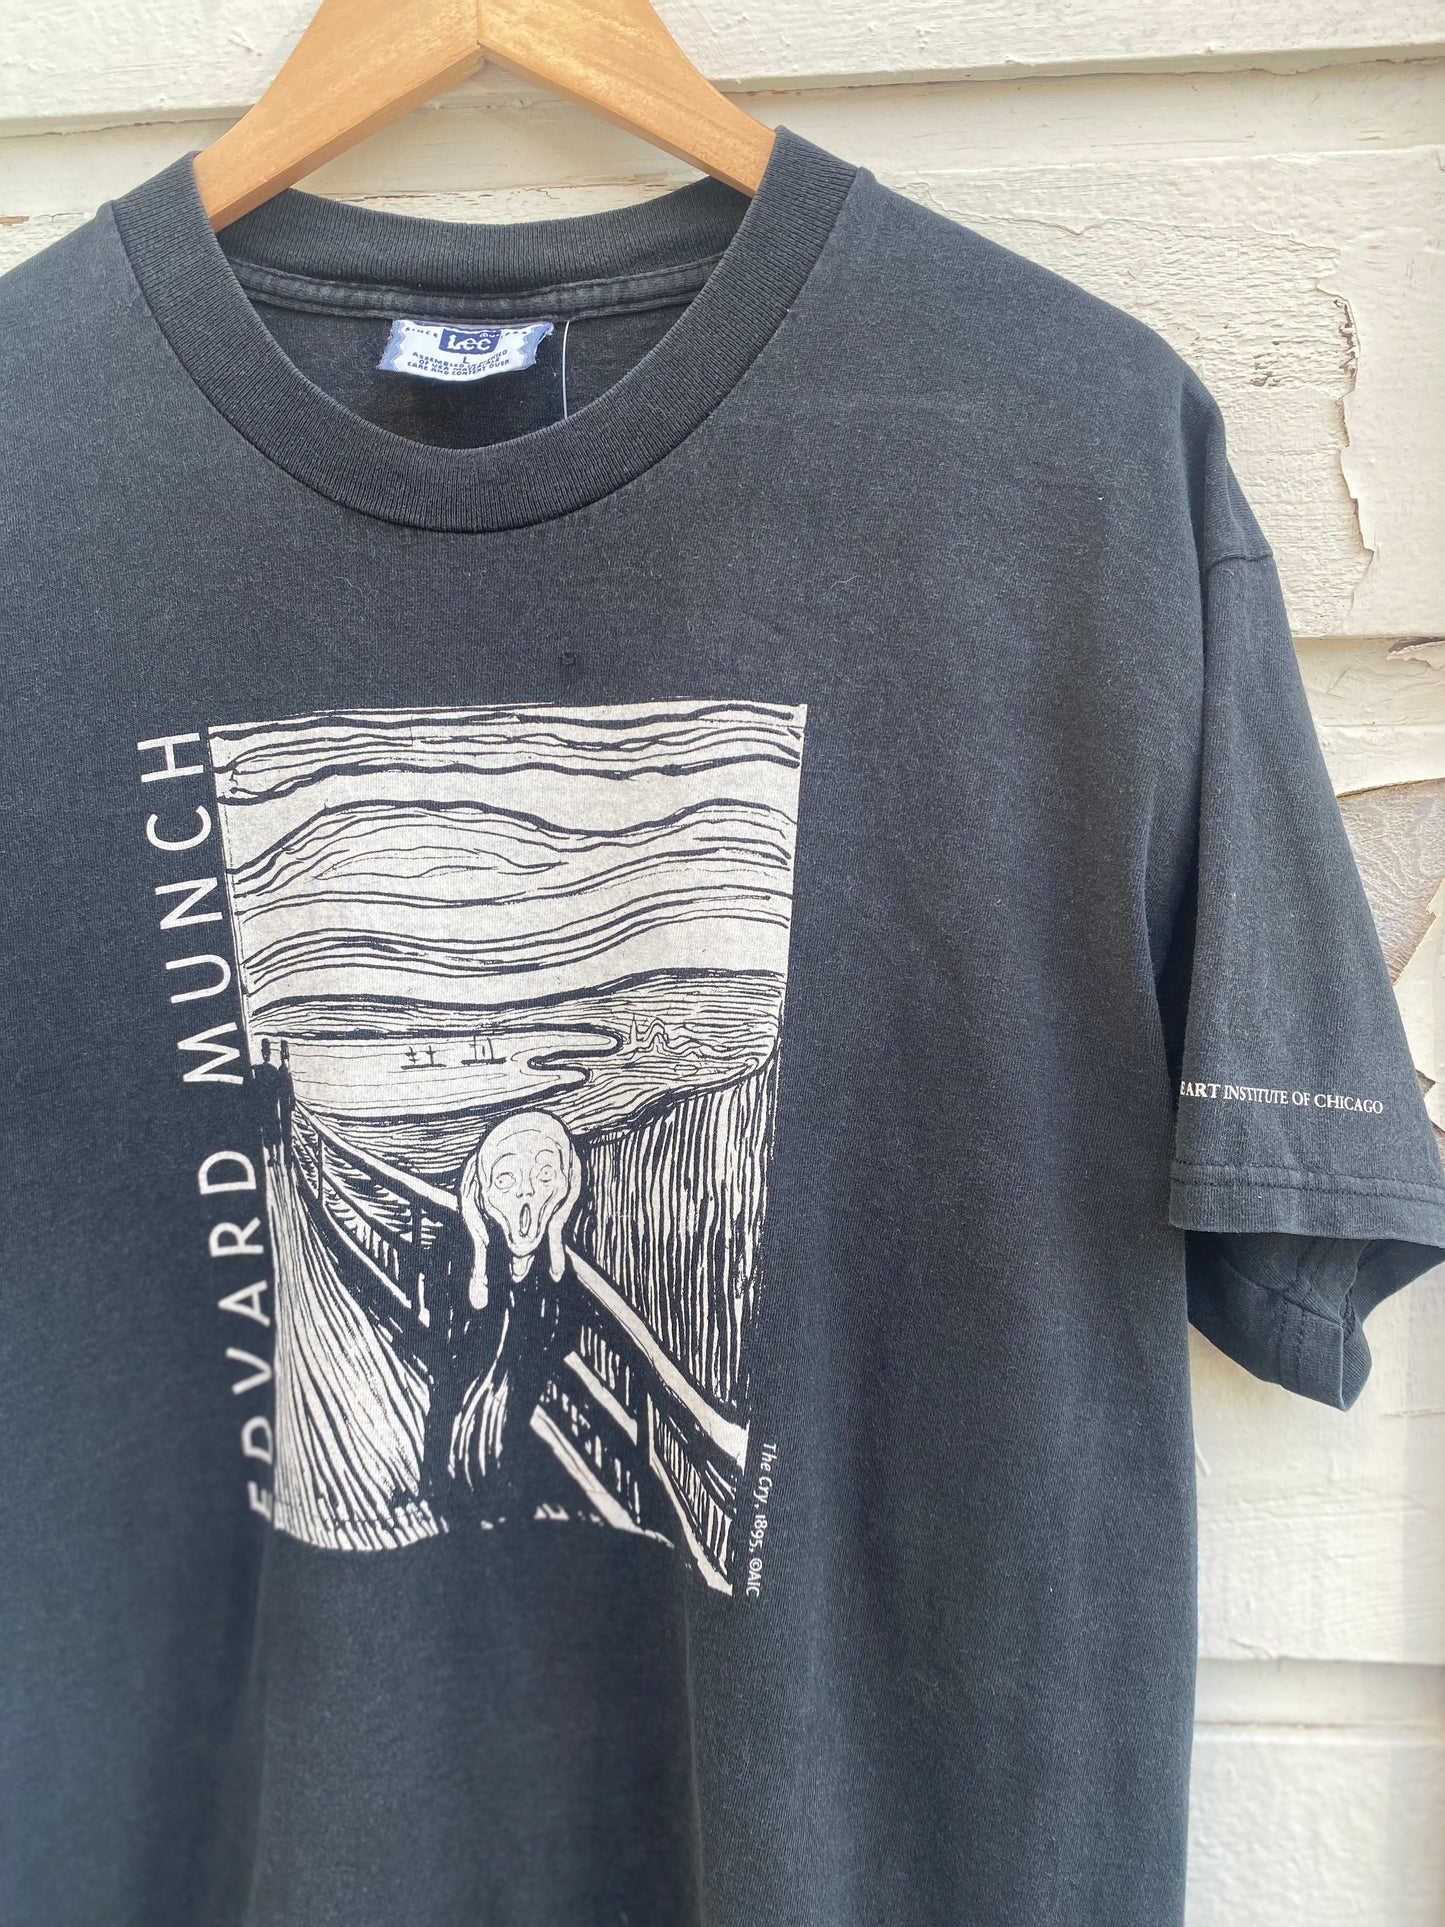 Vintage Art Institute of Chicago Edward Munch The Cry / The Scream Tshirt Large